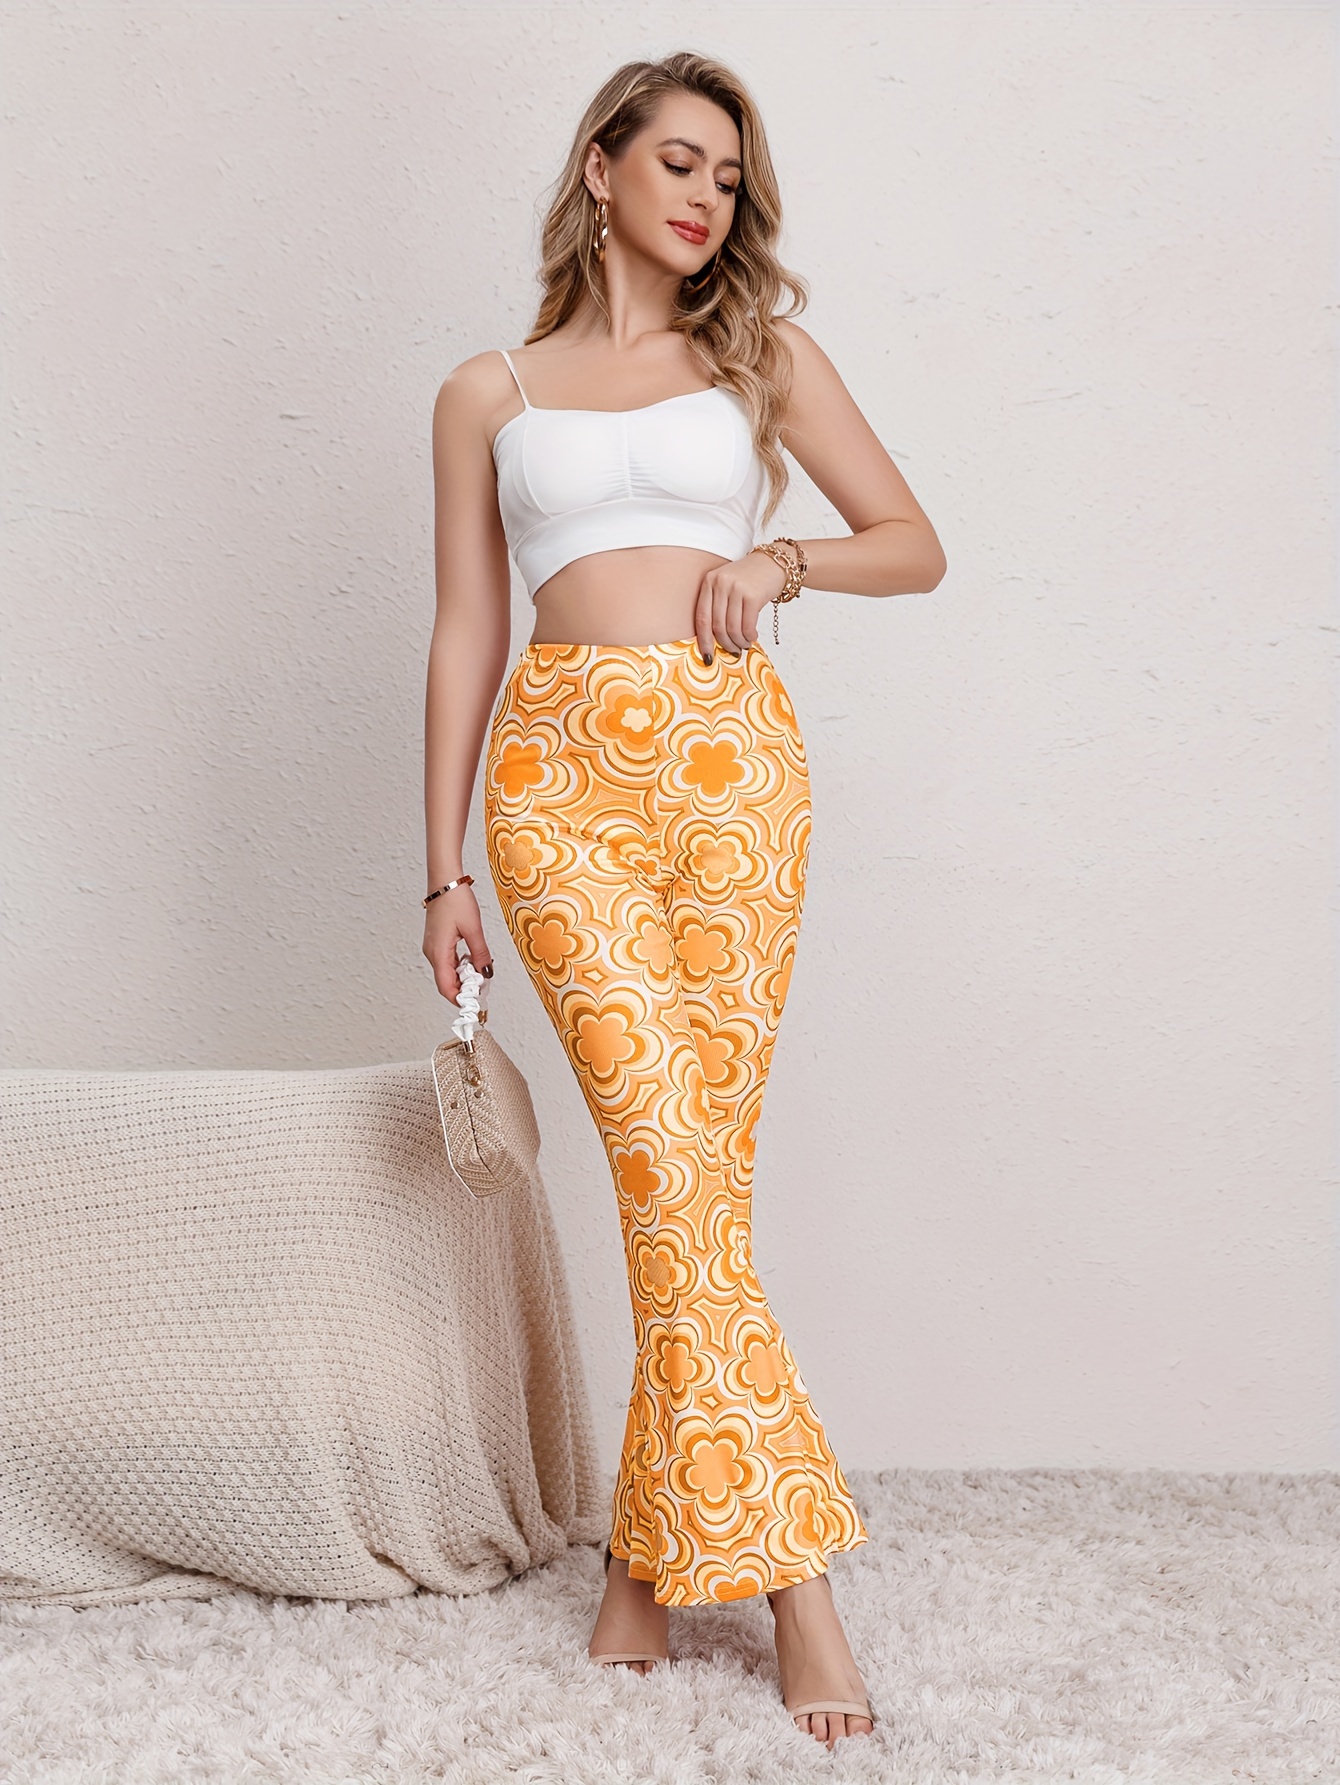 Tawop Fashion Women'S Print Casual Loose Cotton And Linen Retro Wide-Leg Pants  Forbidden Pants Easter Gifts 